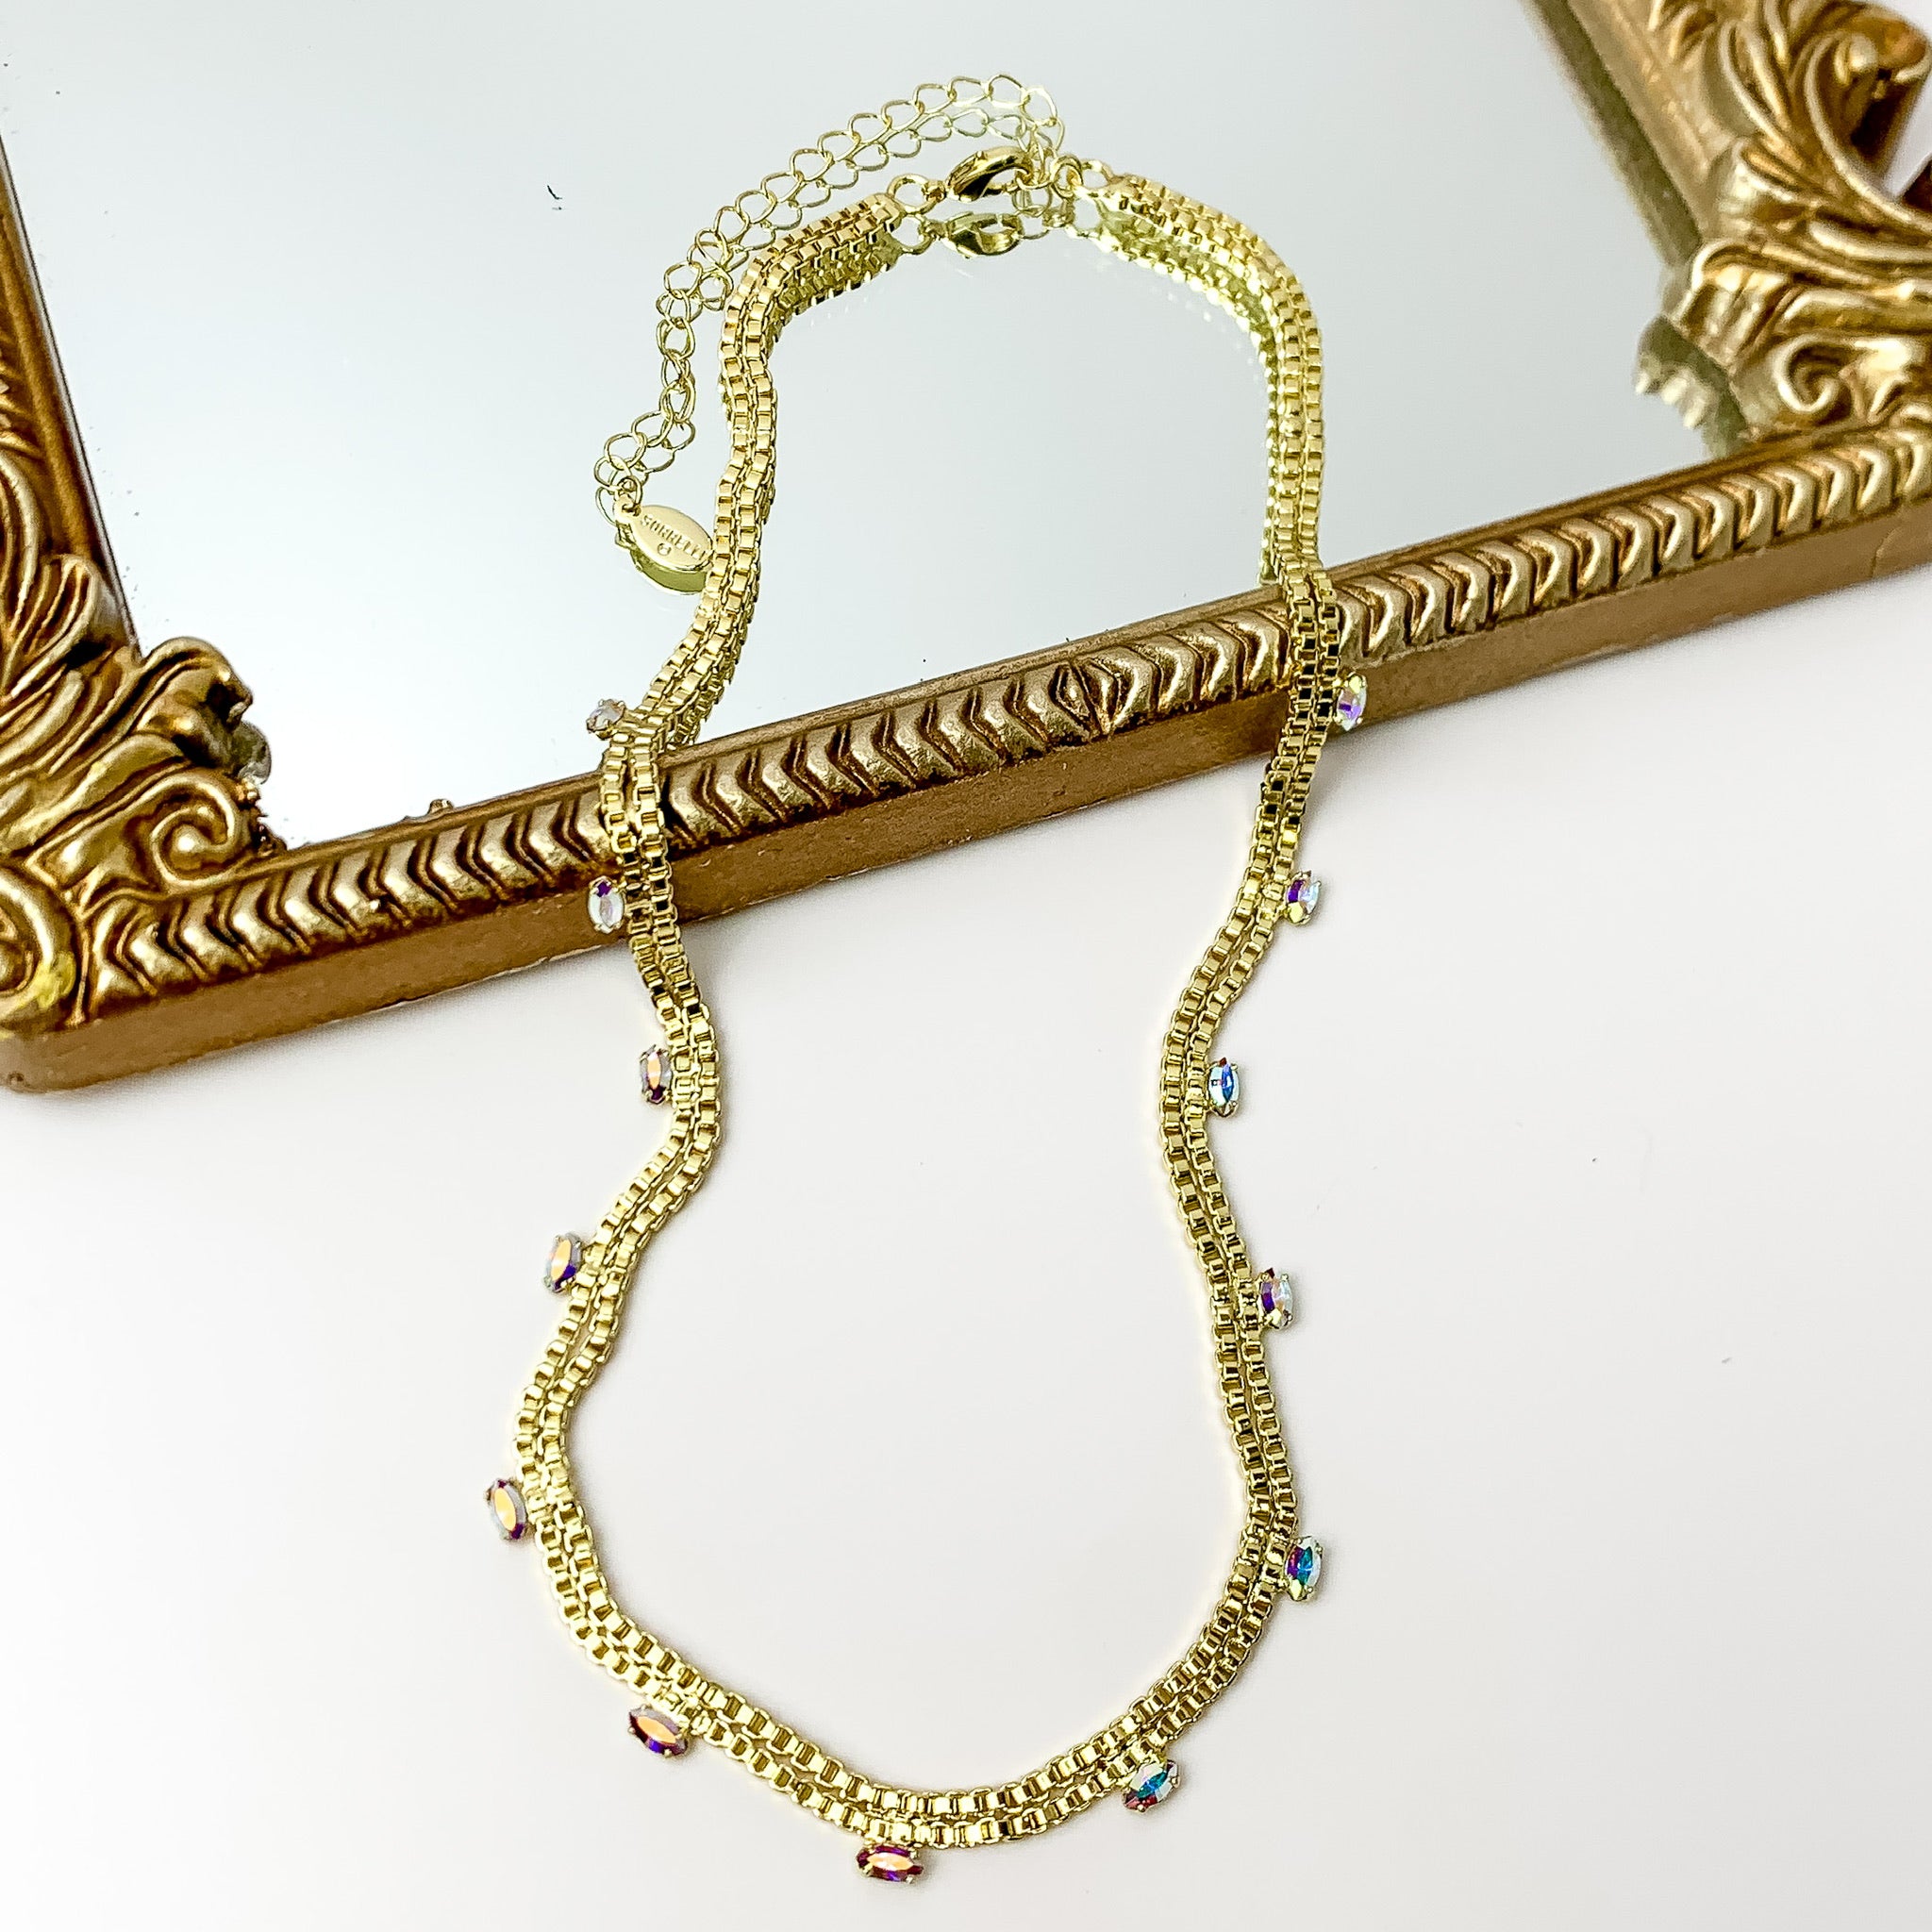 Pictured is a double, gold box chain necklace with ab crystal charms. This necklace is pictured partially laying on a gold mirror on a white background.    